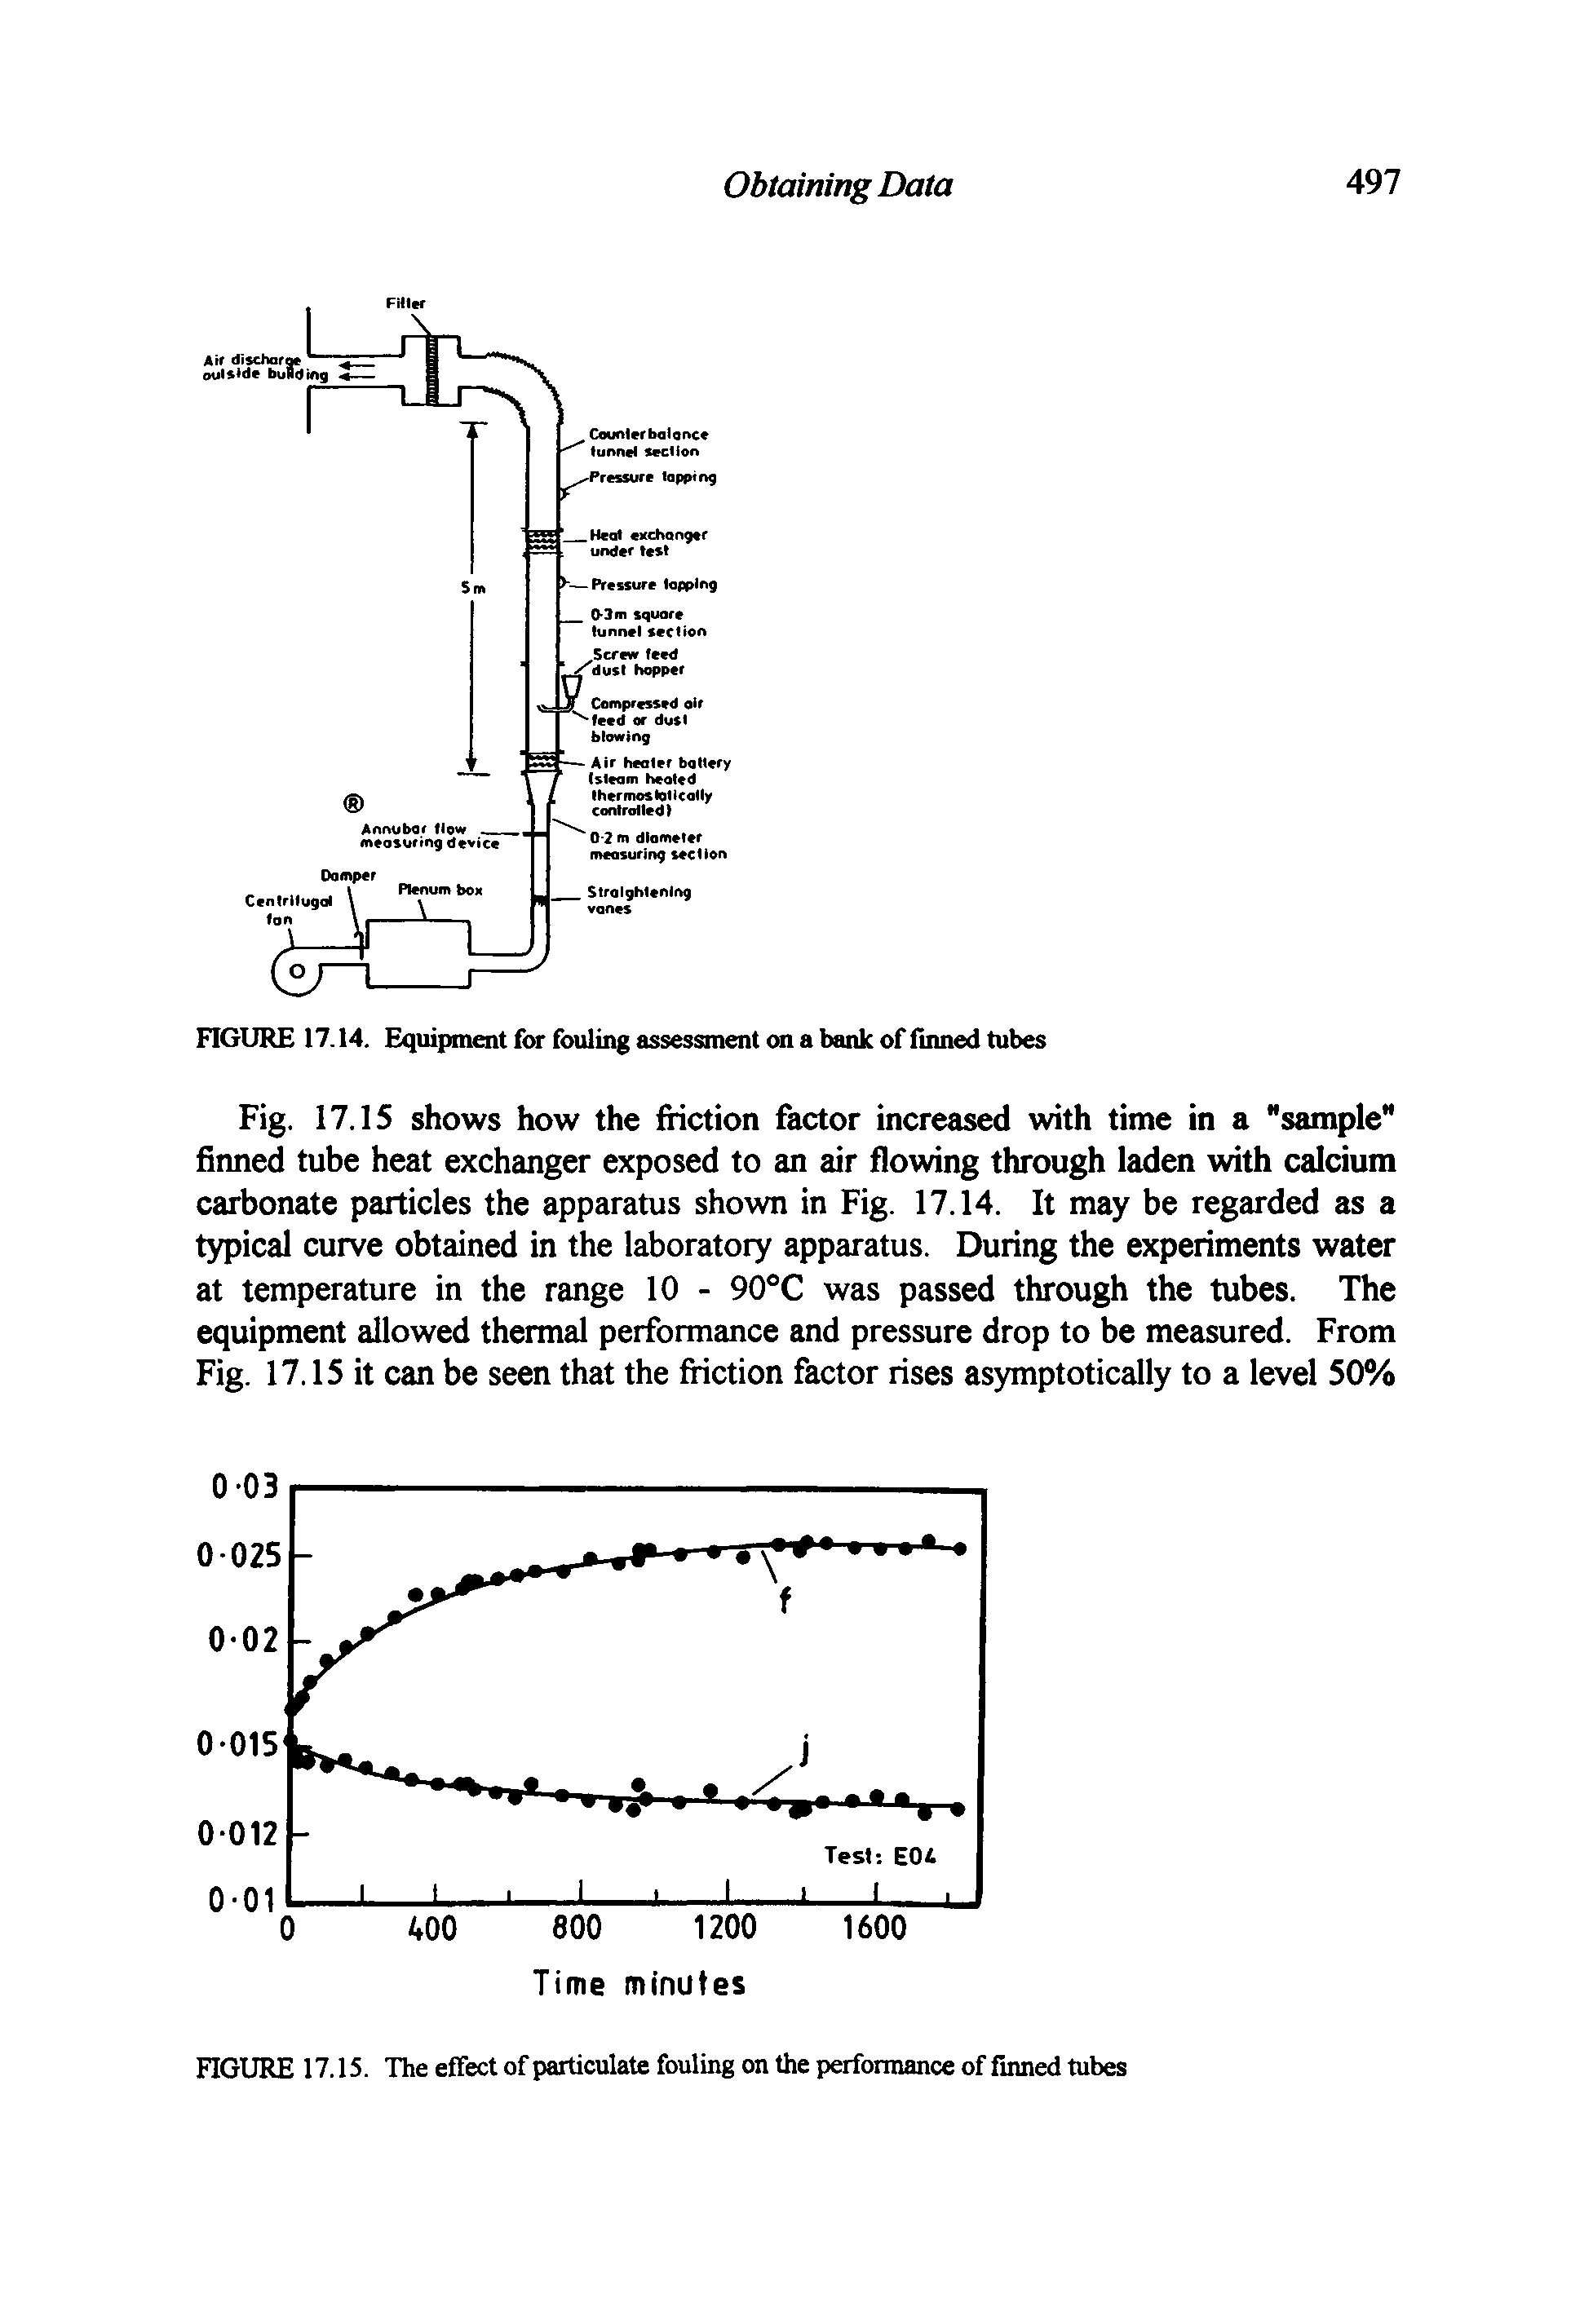 Fig. 17.15 shows how the friction factor increased with time in a "sample" finned tube heat exchanger exposed to an air flowing through laden with calcium carbonate particles the apparatus shown in Fig. 17.14. It may be regarded as a typical curve obtained in the laboratory apparatus. During the experiments water at temperature in the range 10 - 90°C was passed through the tubes. The equipment allowed thermal performance and pressure drop to be measured. From Fig. 17.15 it can be seen that the friction factor rises asymptotically to a level 50%...